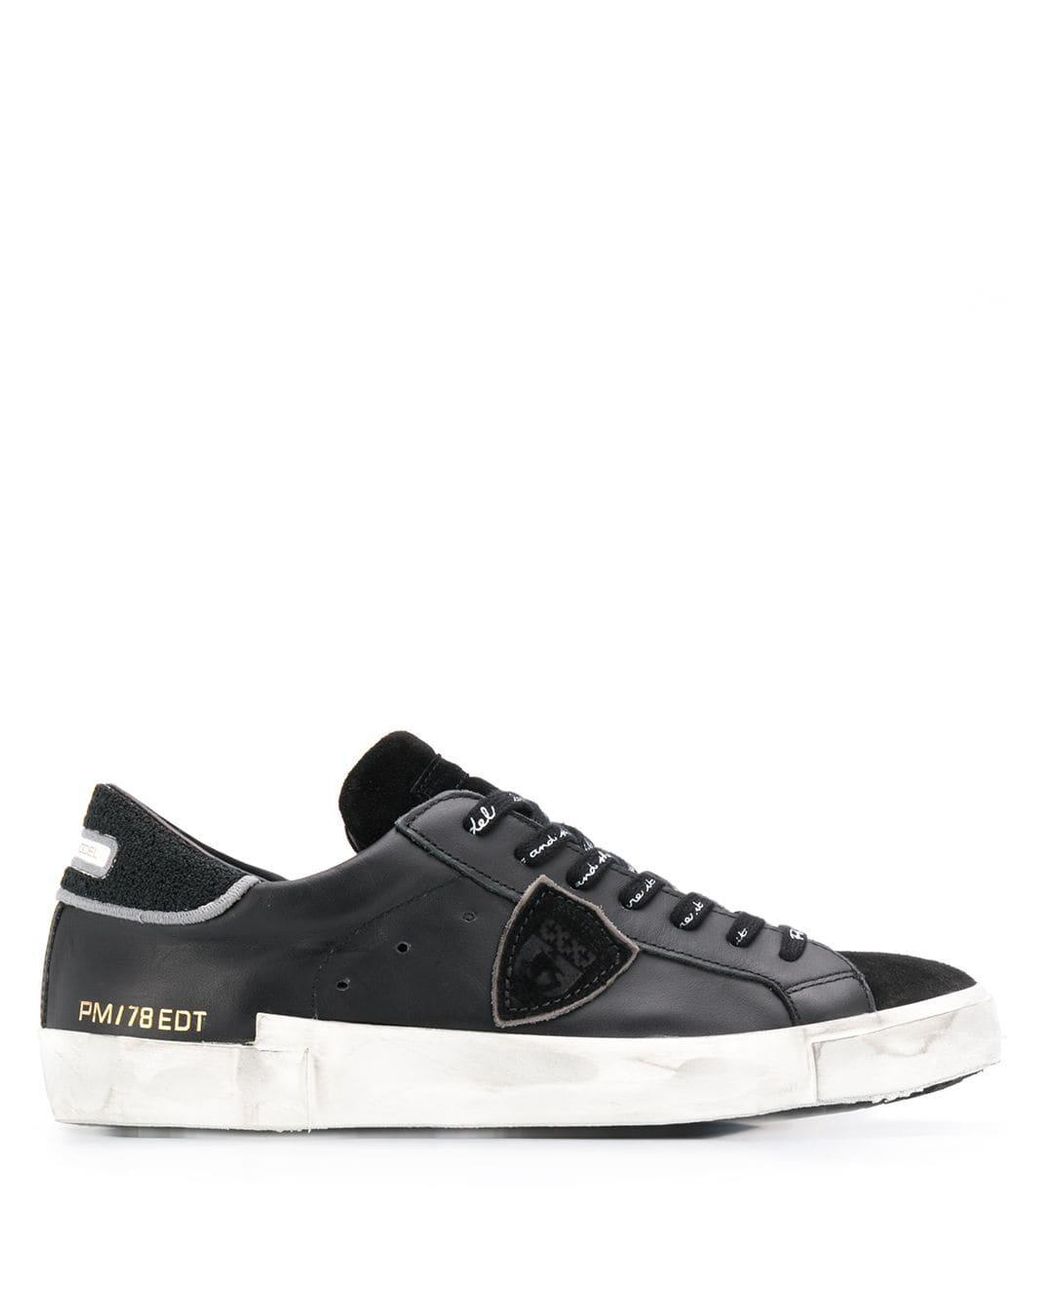 Philippe Model Leather Prsx Eponge Sneakers in Black for Men - Save 7% ...